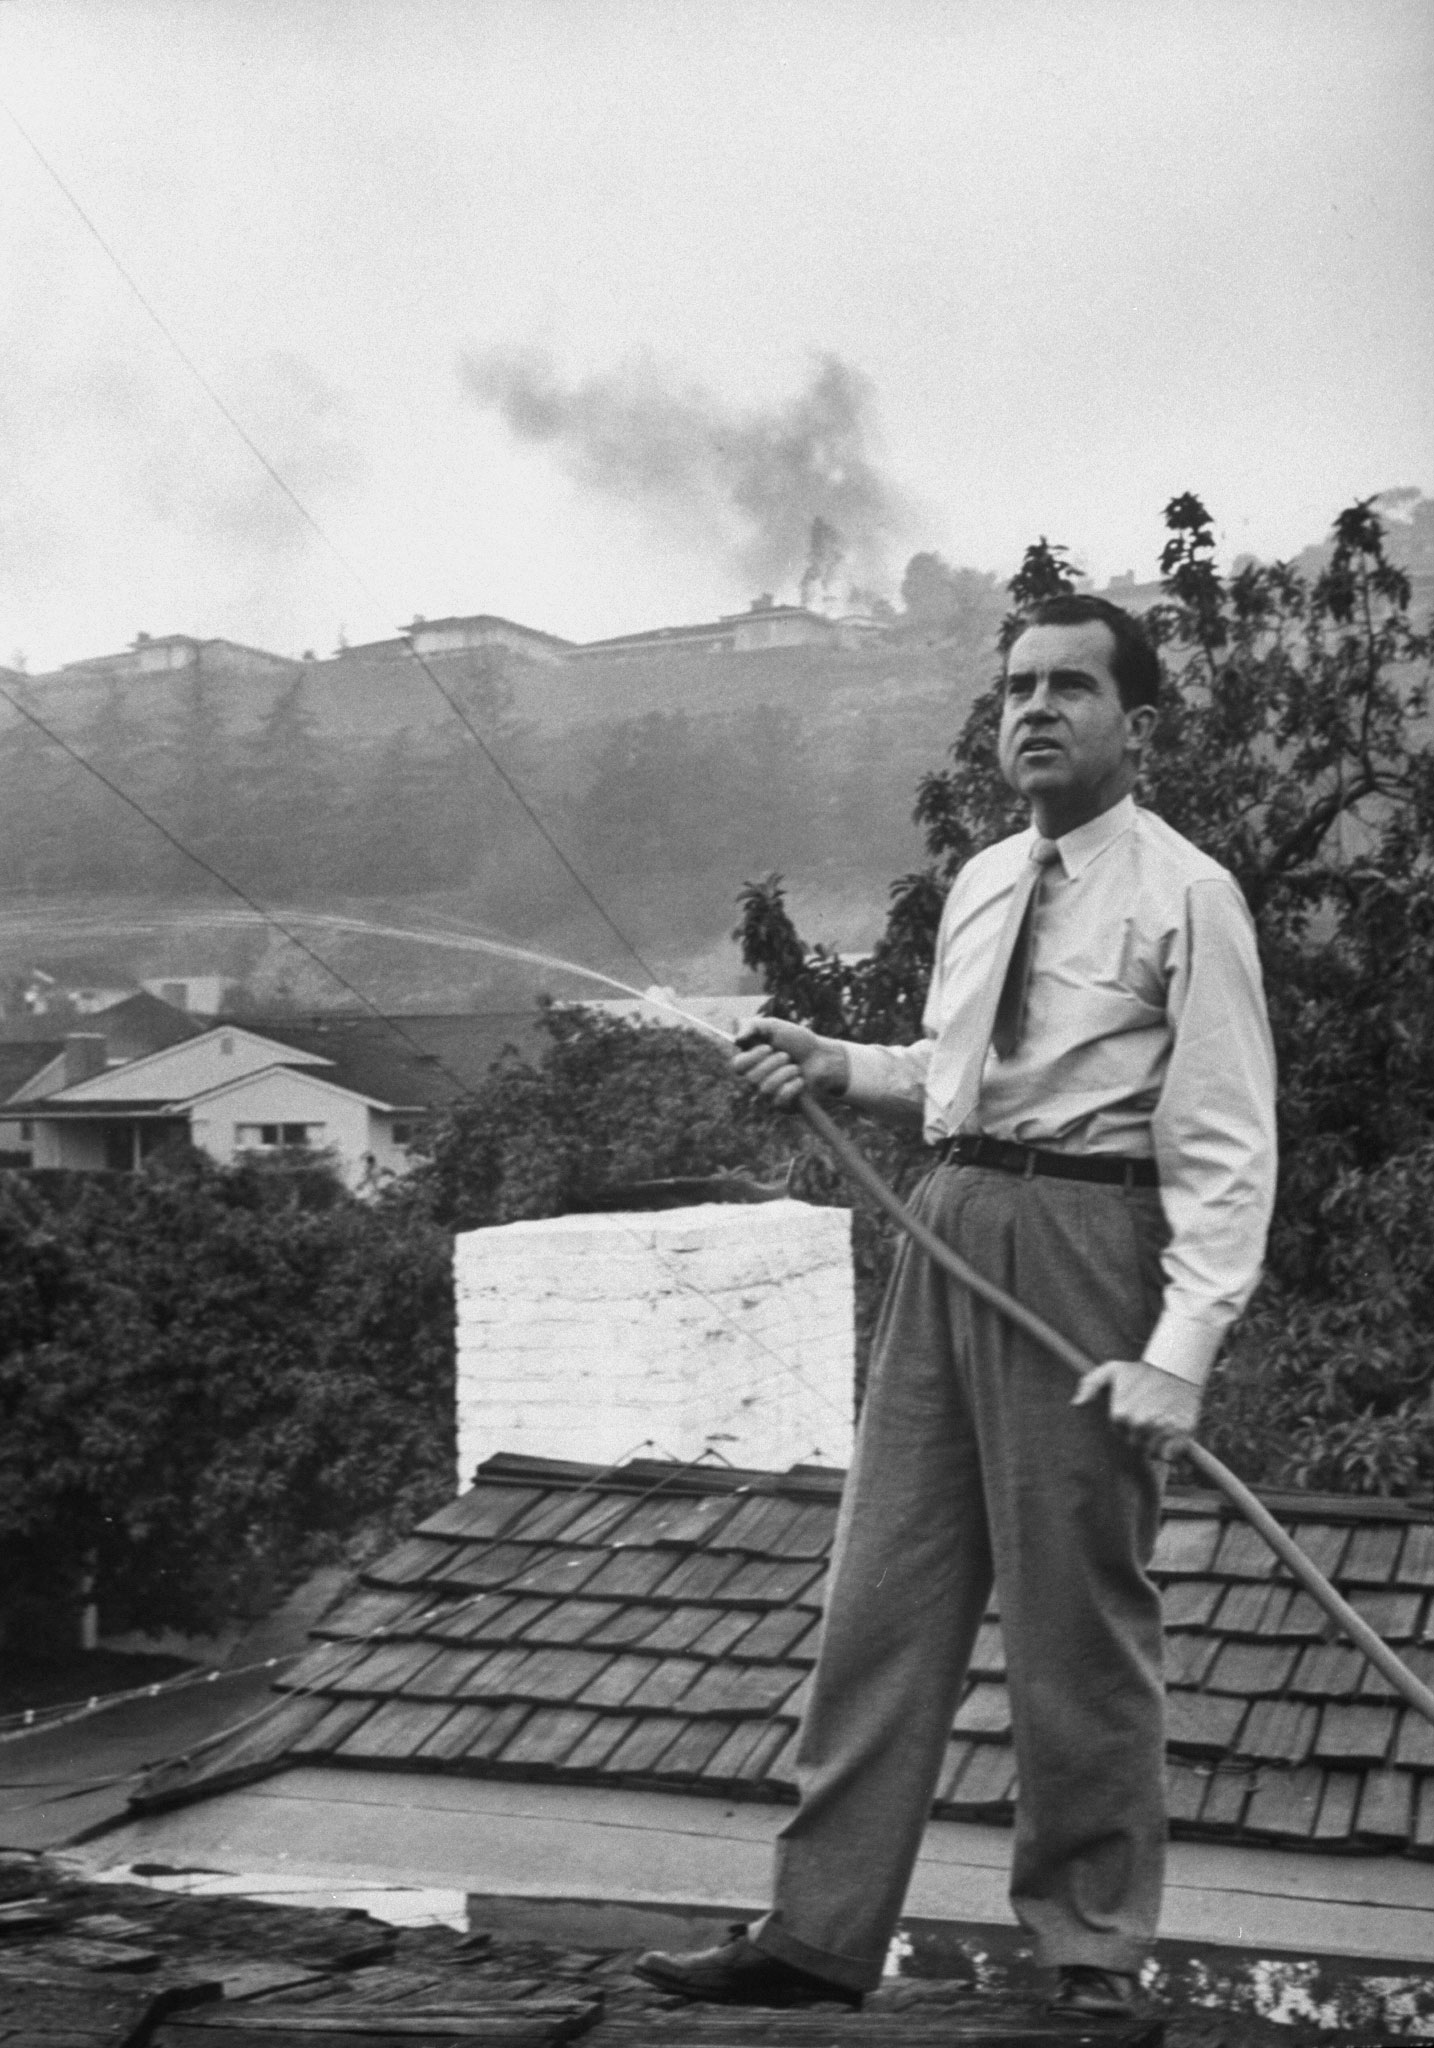 Senator Richard Nixon on the roof of his home in Los Angeles, trying to douse fires caused by a brush blaze, 1961.